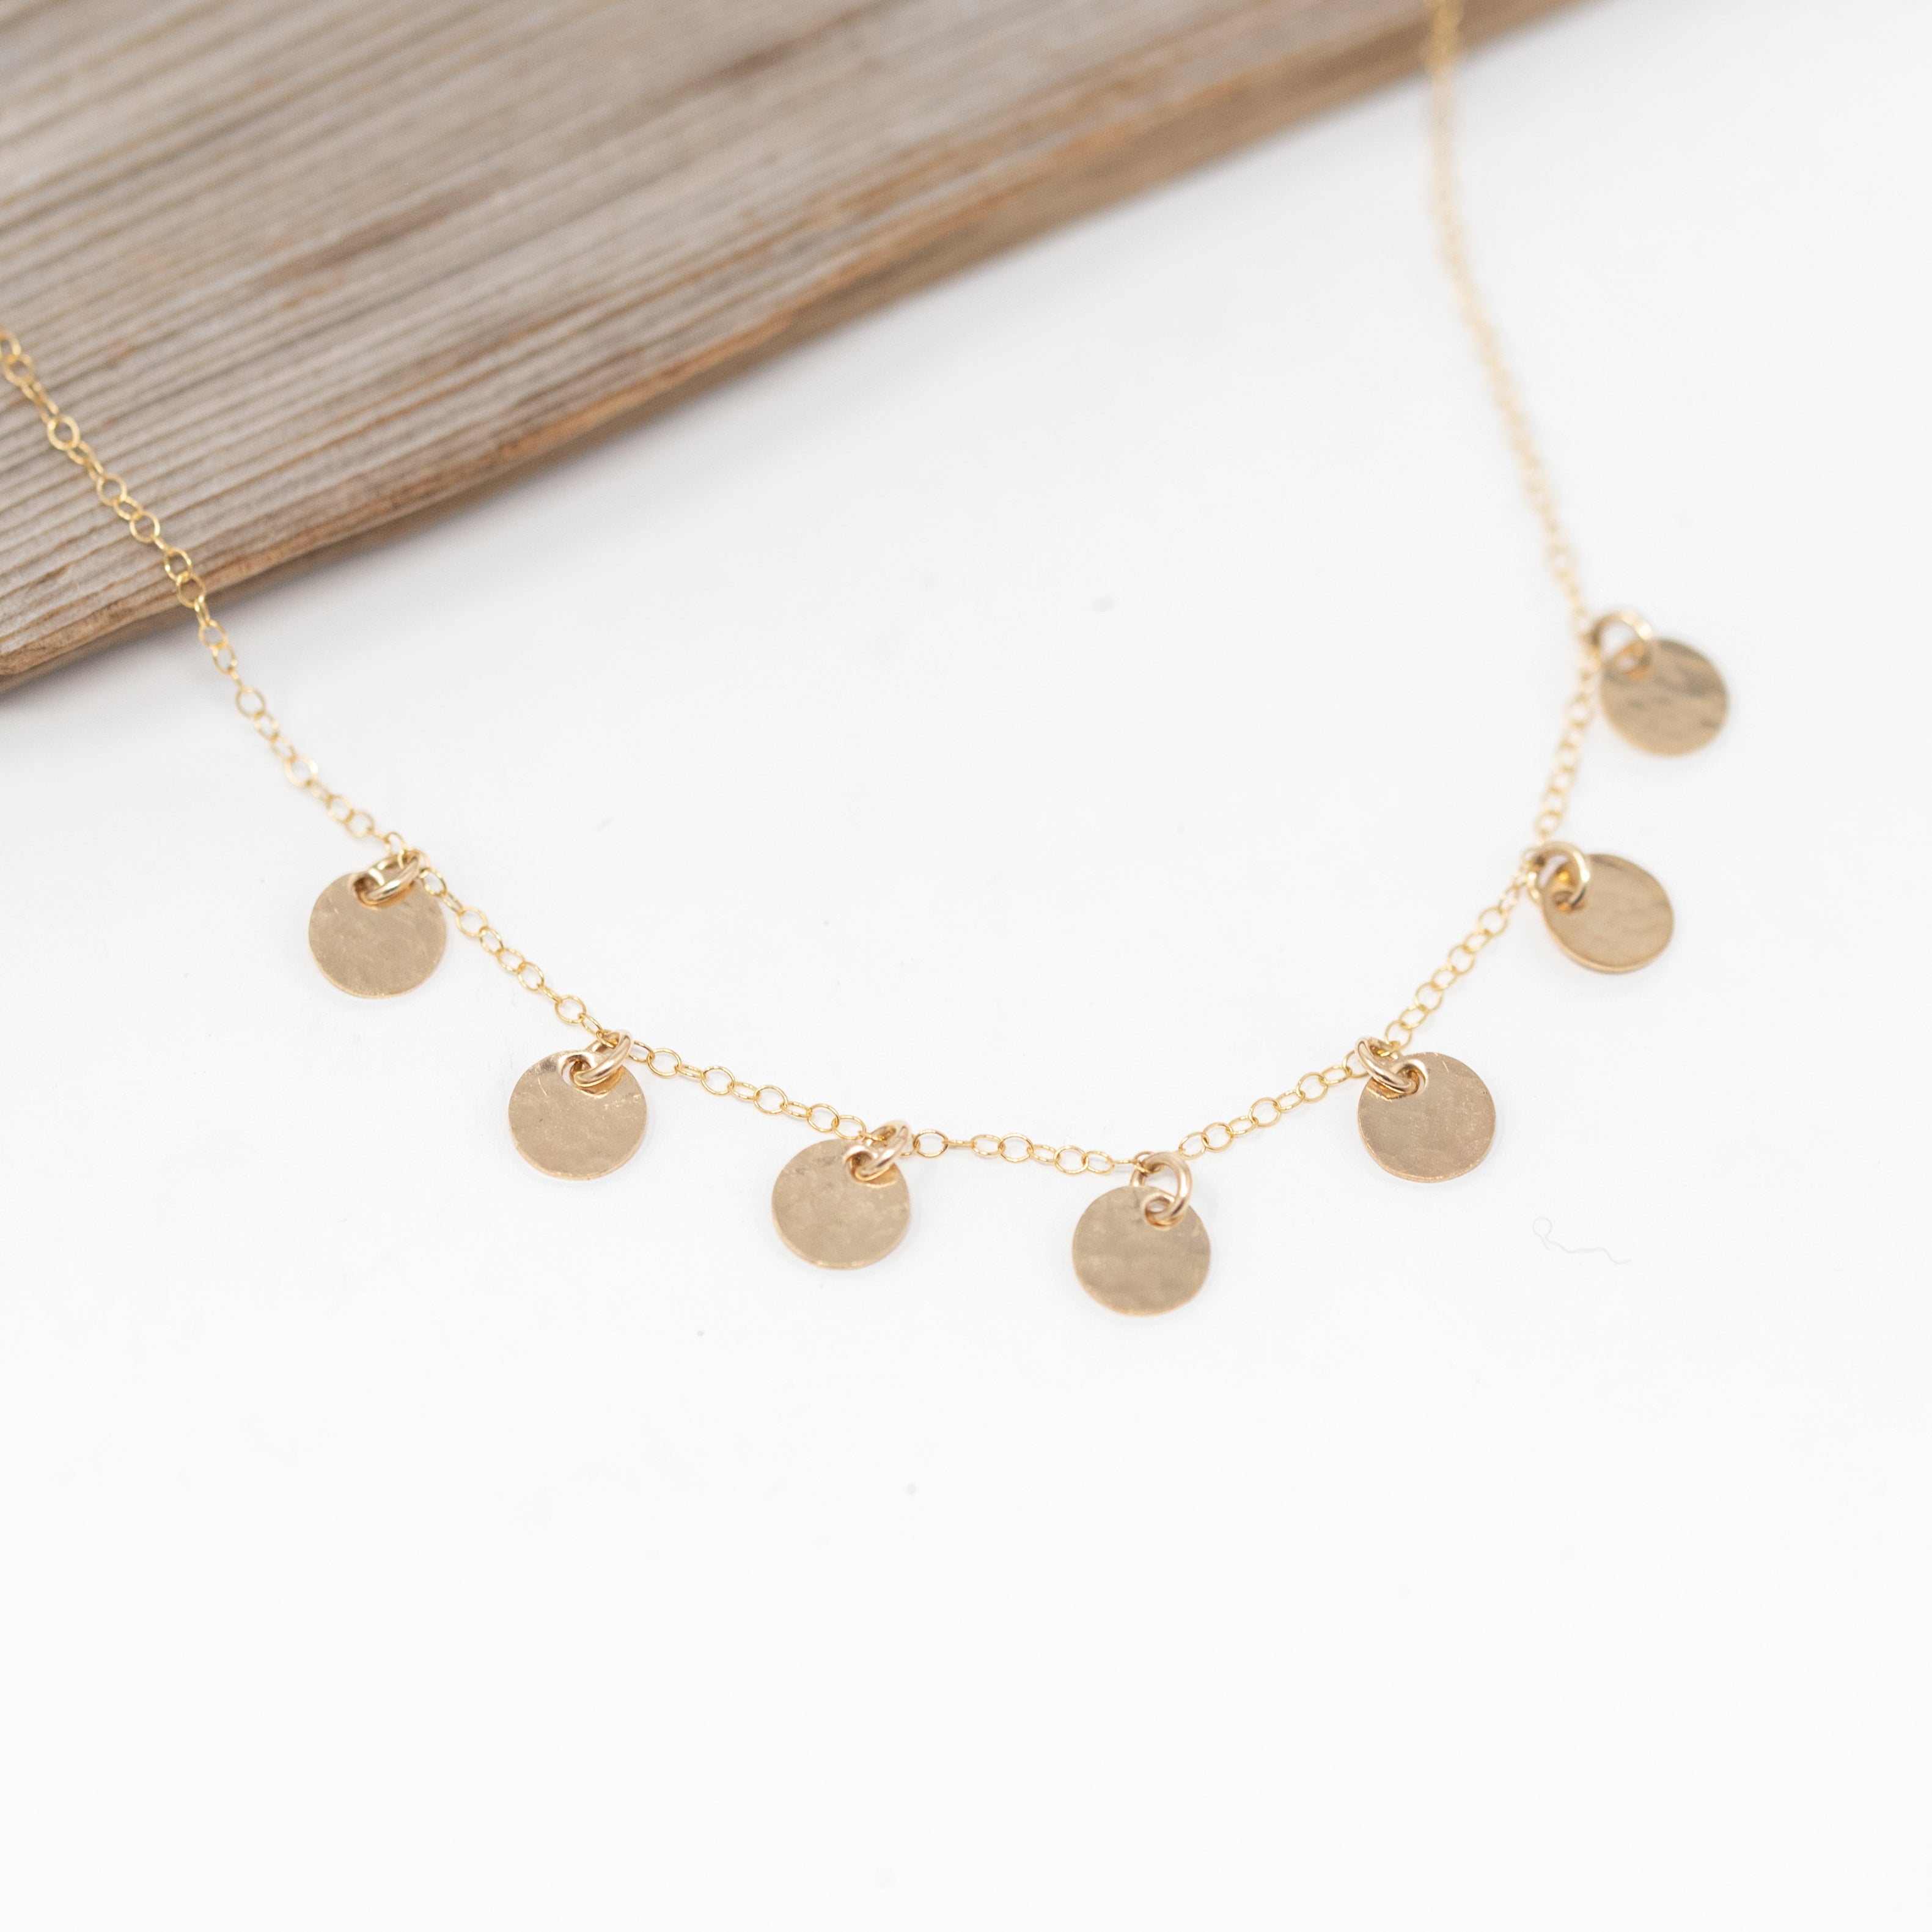 gold necklace with seven tiny circles attached to it. They are about a pea size and spaced about half an inch apart. 